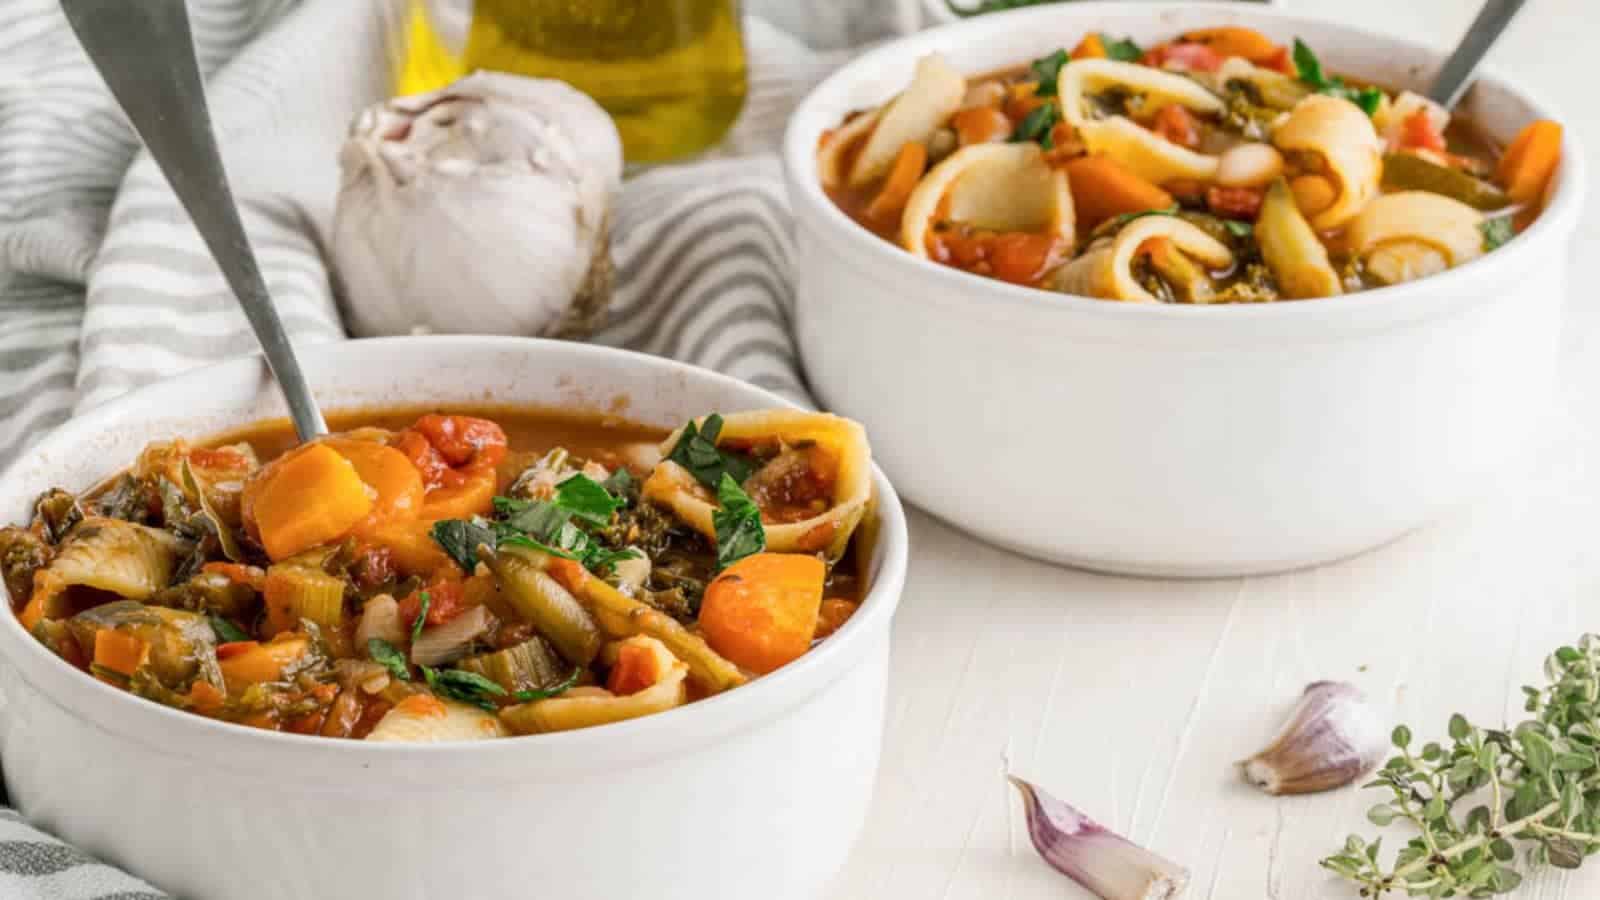 <p>Our Minestrone Soup brings a burst of Italian veggie goodness to your meal. It's rich, it's hearty, and it feeds the soul with each spoonful. Enjoy it as a starter or as a main with some crusty bread. It's a complete meal that brings comfort, especially on chilly days.<br><strong>Get the Recipe: </strong><a href="https://twocityvegans.com/best-vegan-minestrone-soup-recipe/?utm_source=msn&utm_medium=page&utm_campaign=">Minestrone Soup</a></p>